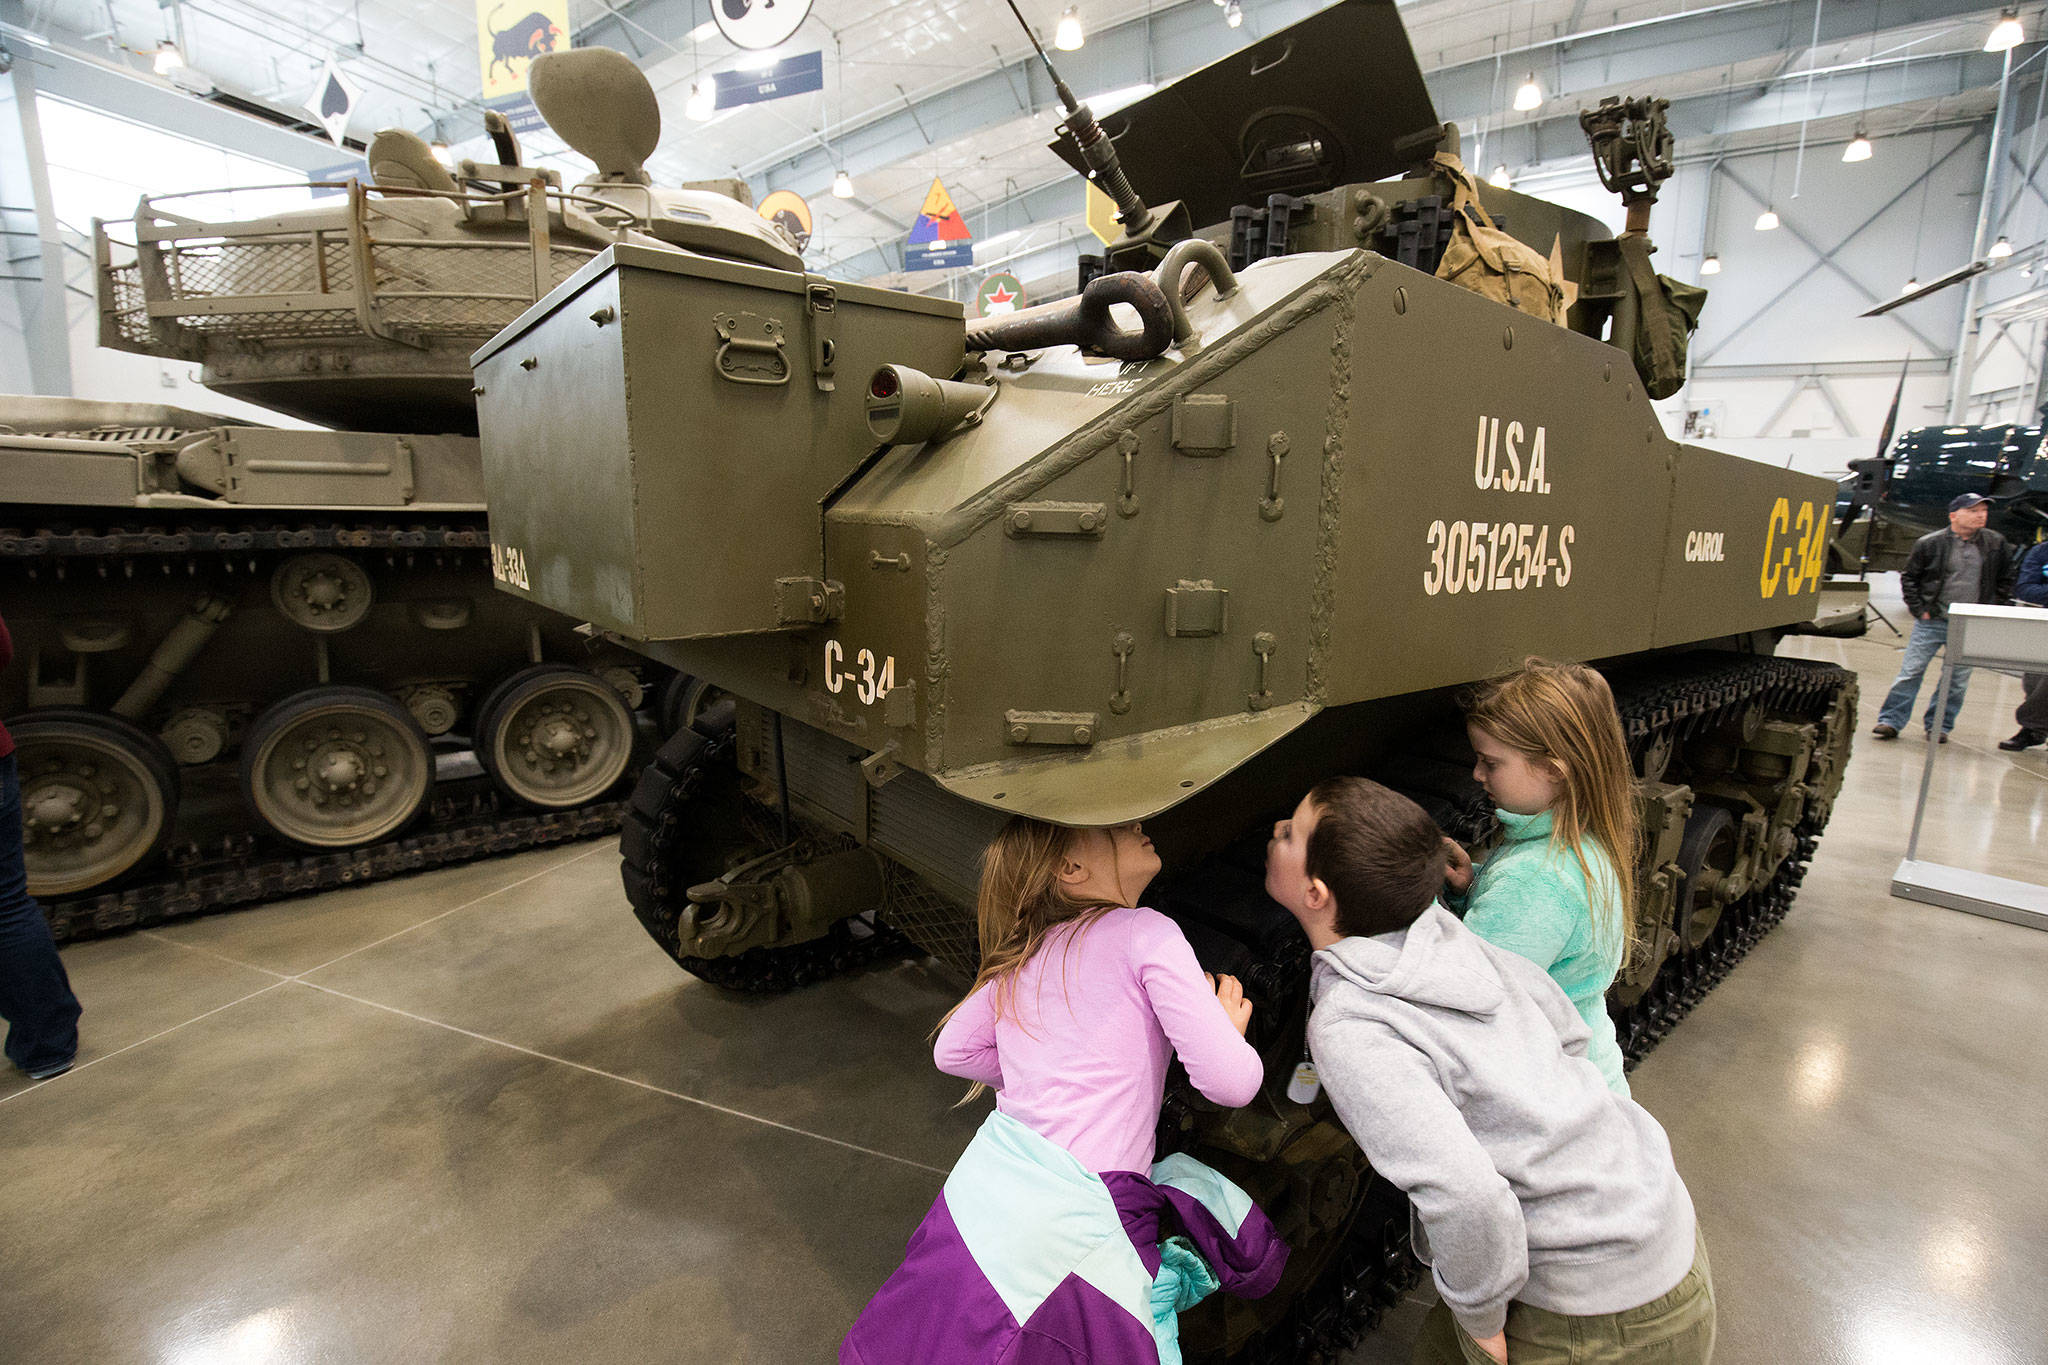 Visitors at the Flying Heritage & Combat Armor Museum at Paine Field in Everett in 2018. (Andy Bronson / The Herald)